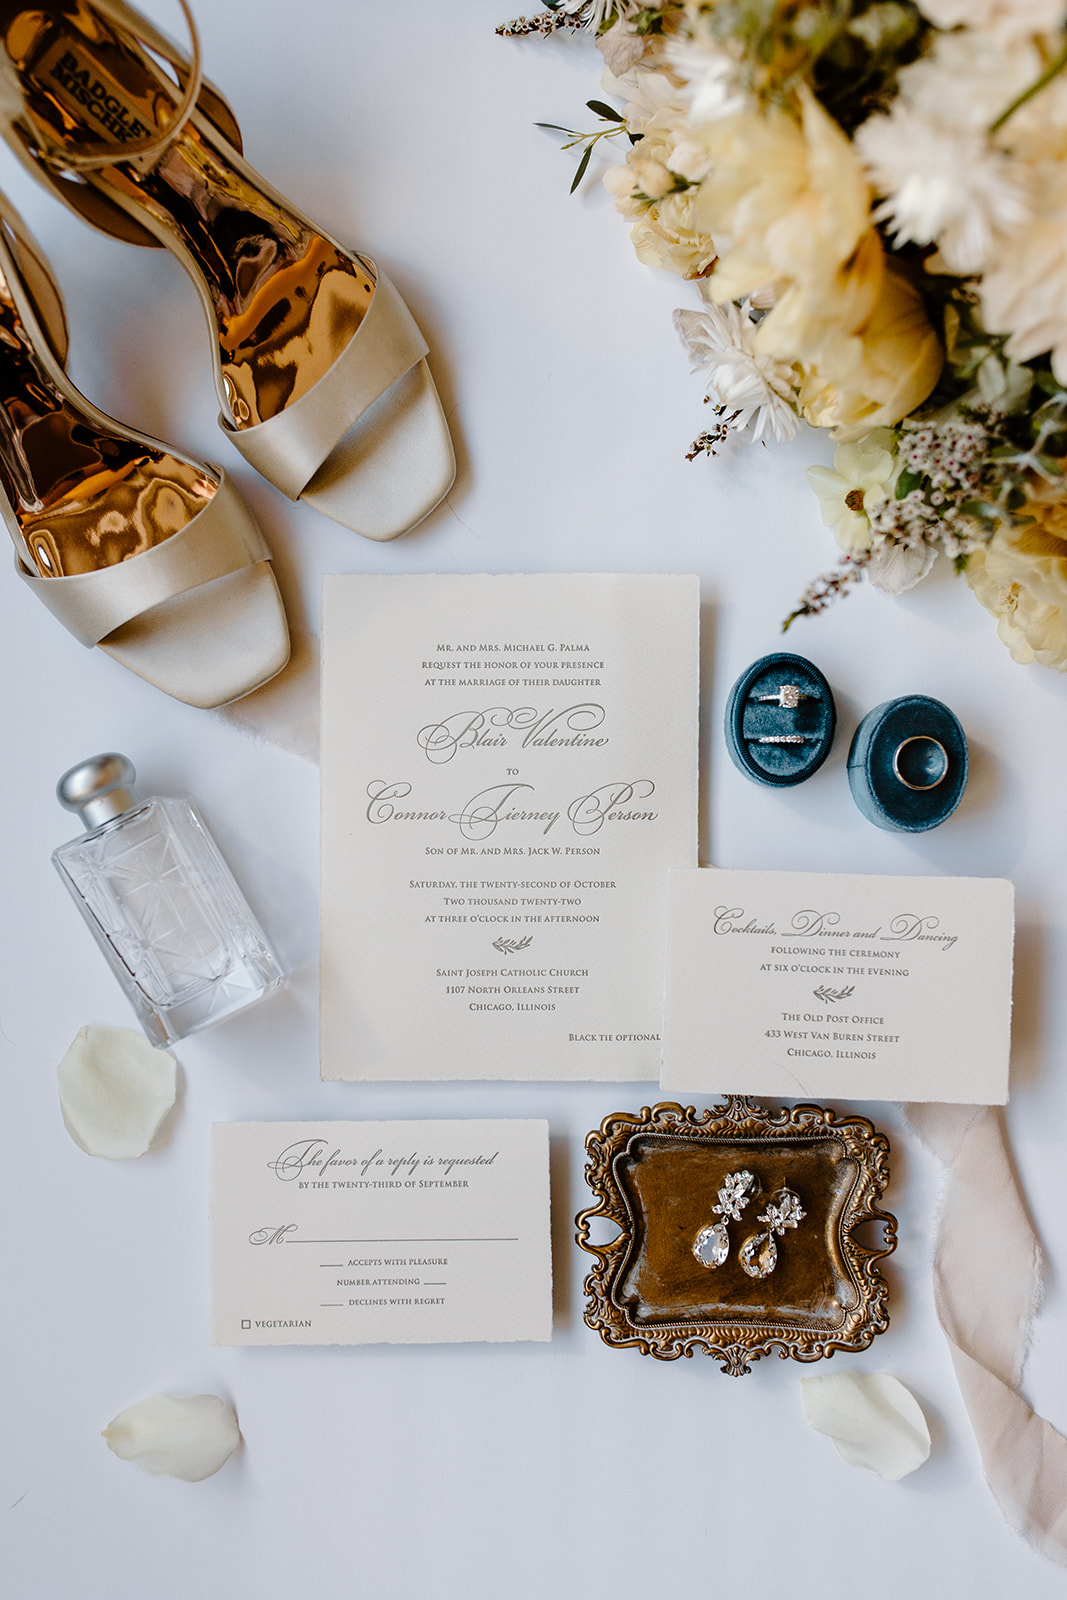 Intimate details for a wonderful city wedding in October 